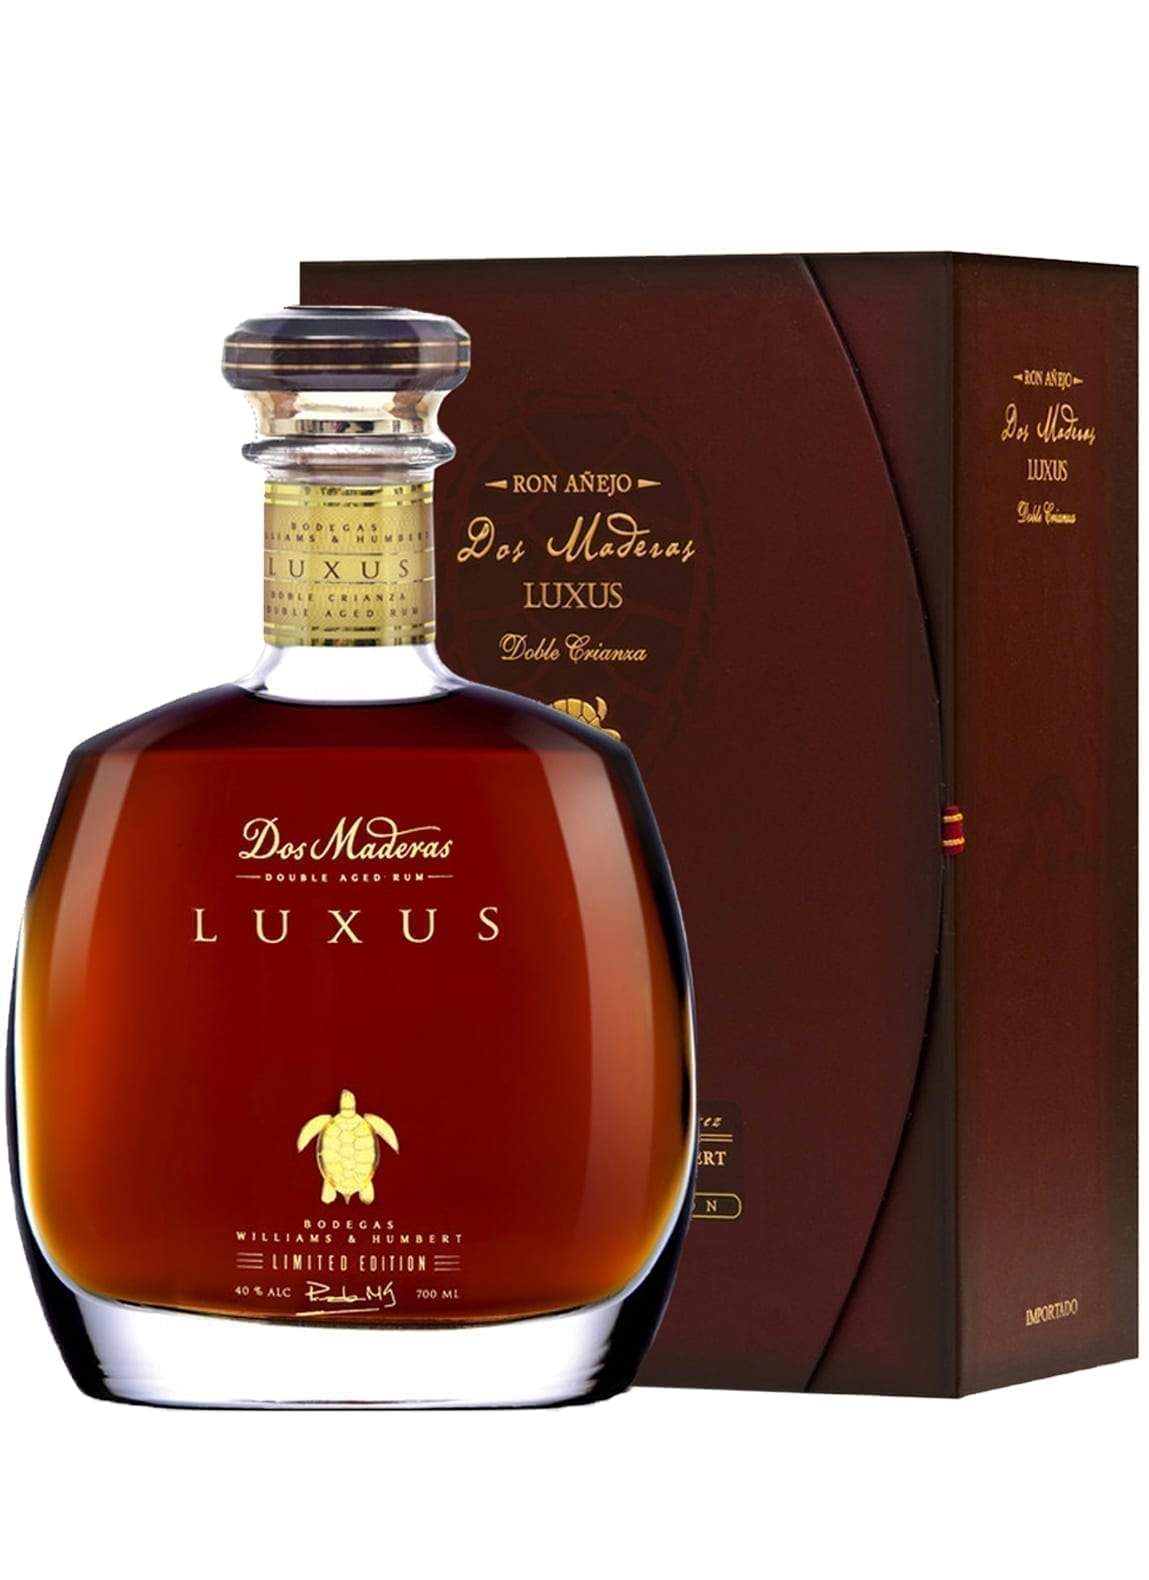 Dos Maderas Rum Luxus 10 years+5 years 40% 700ml | Rum | Shop online at Spirits of France